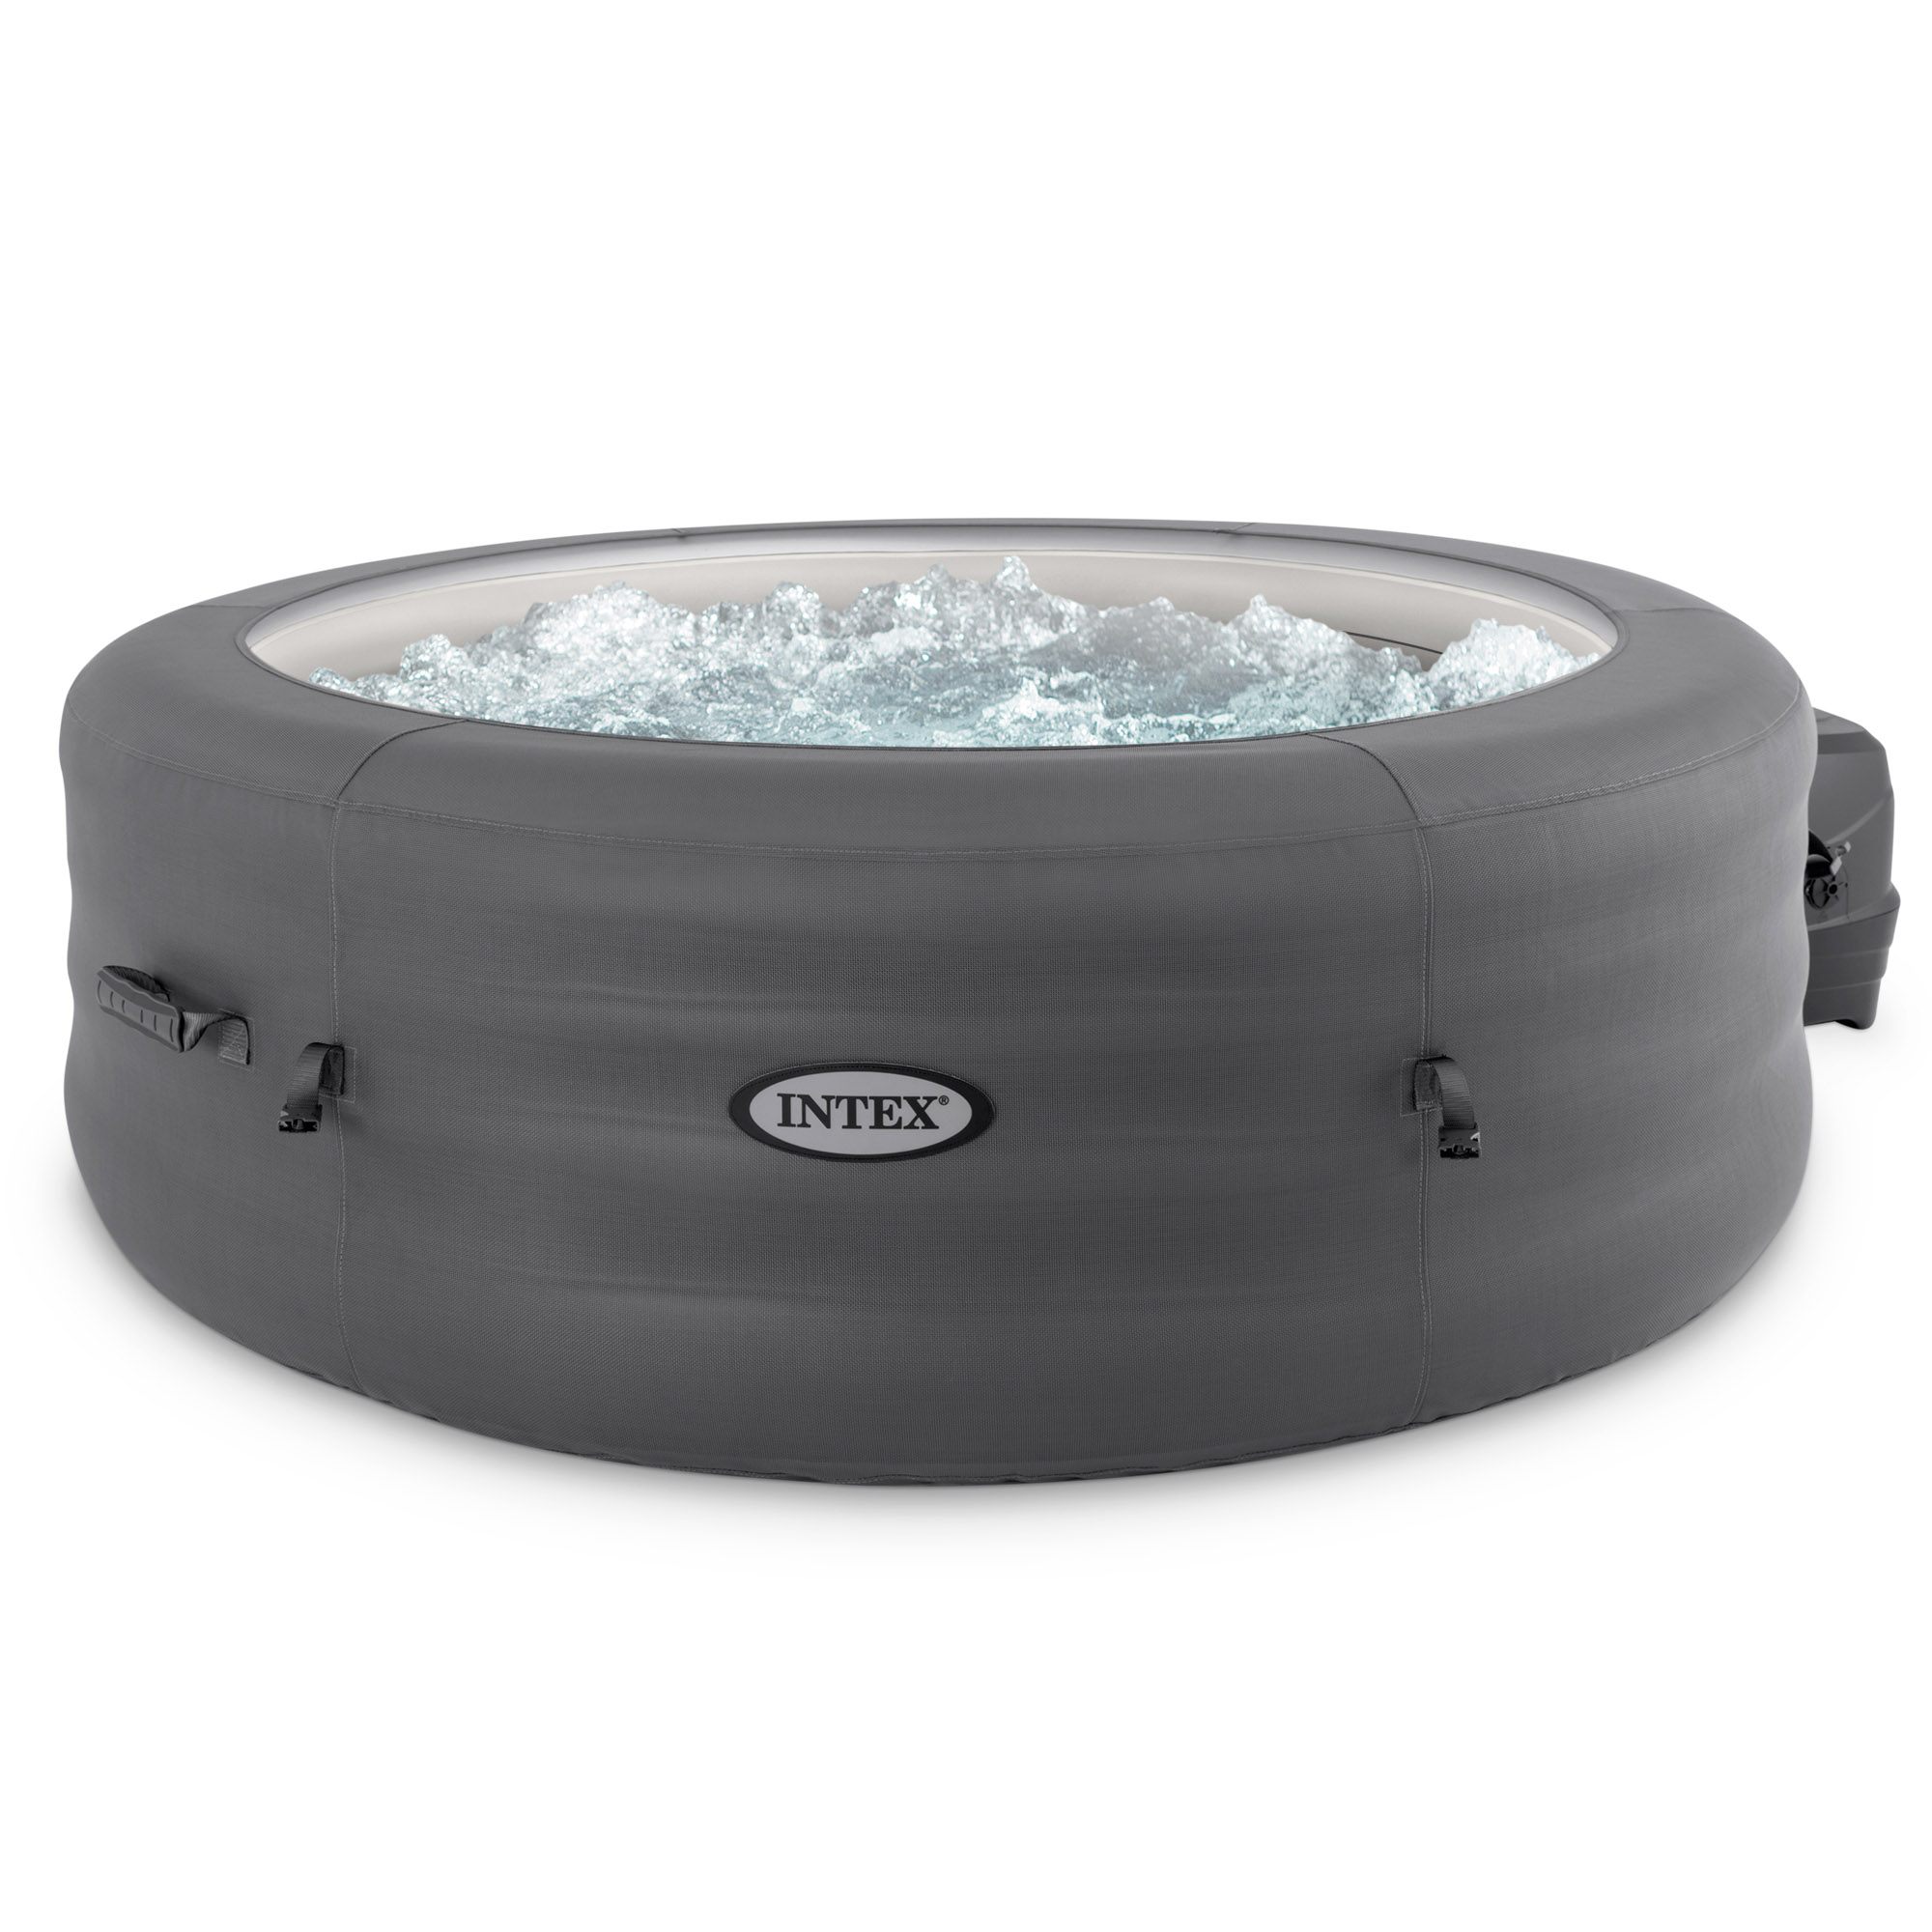 Intex 28481E Simple Spa 77in x 26in Inflatable Hot Tub with Filter Pump & Cover - image 1 of 11